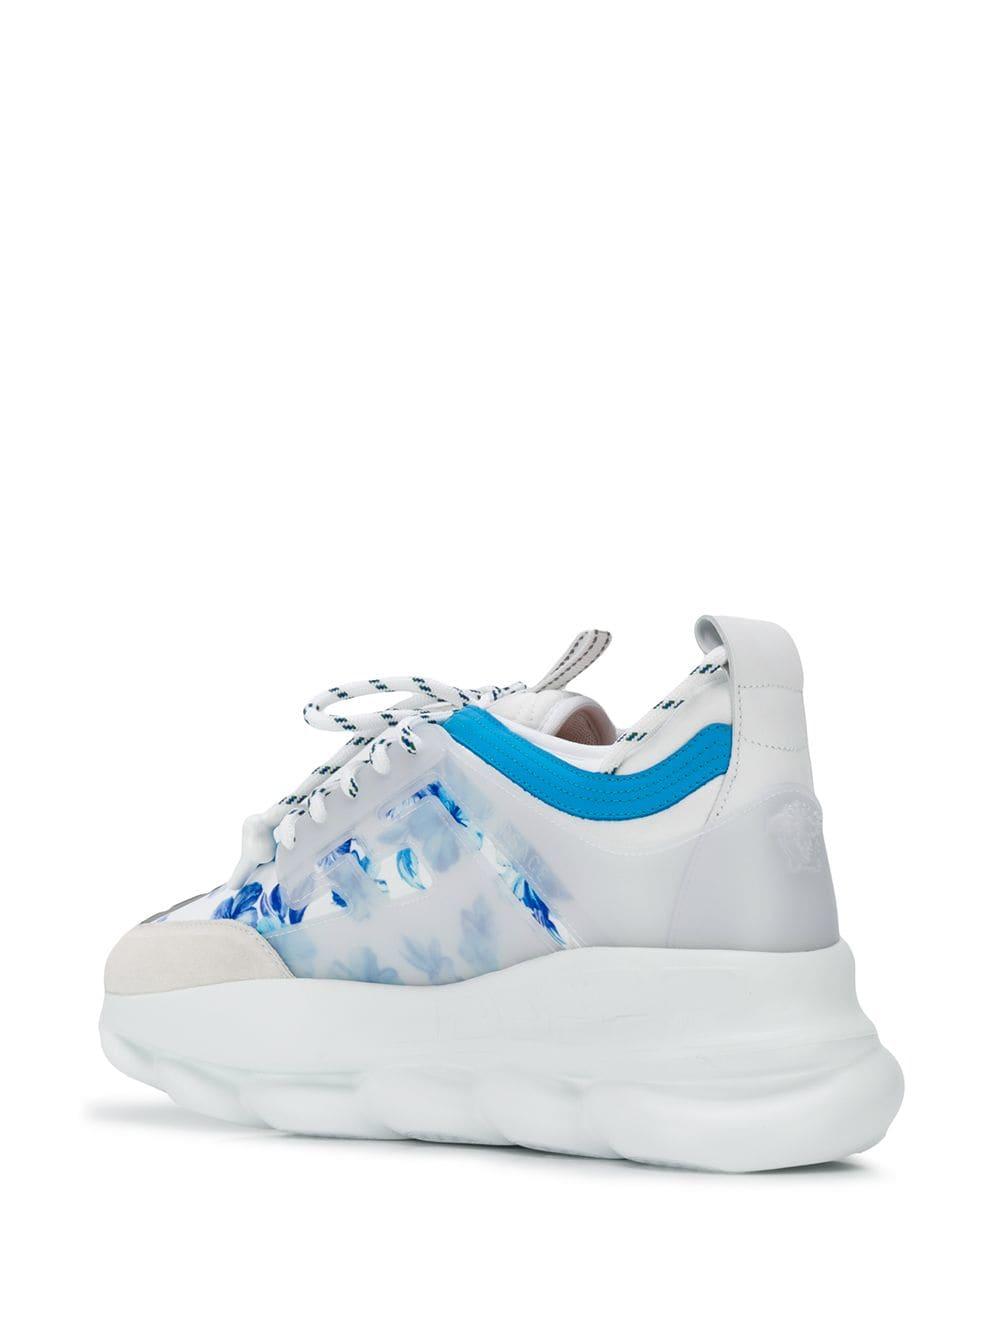 Versace Chain Reaction Chunky Sneakers - Farfetch